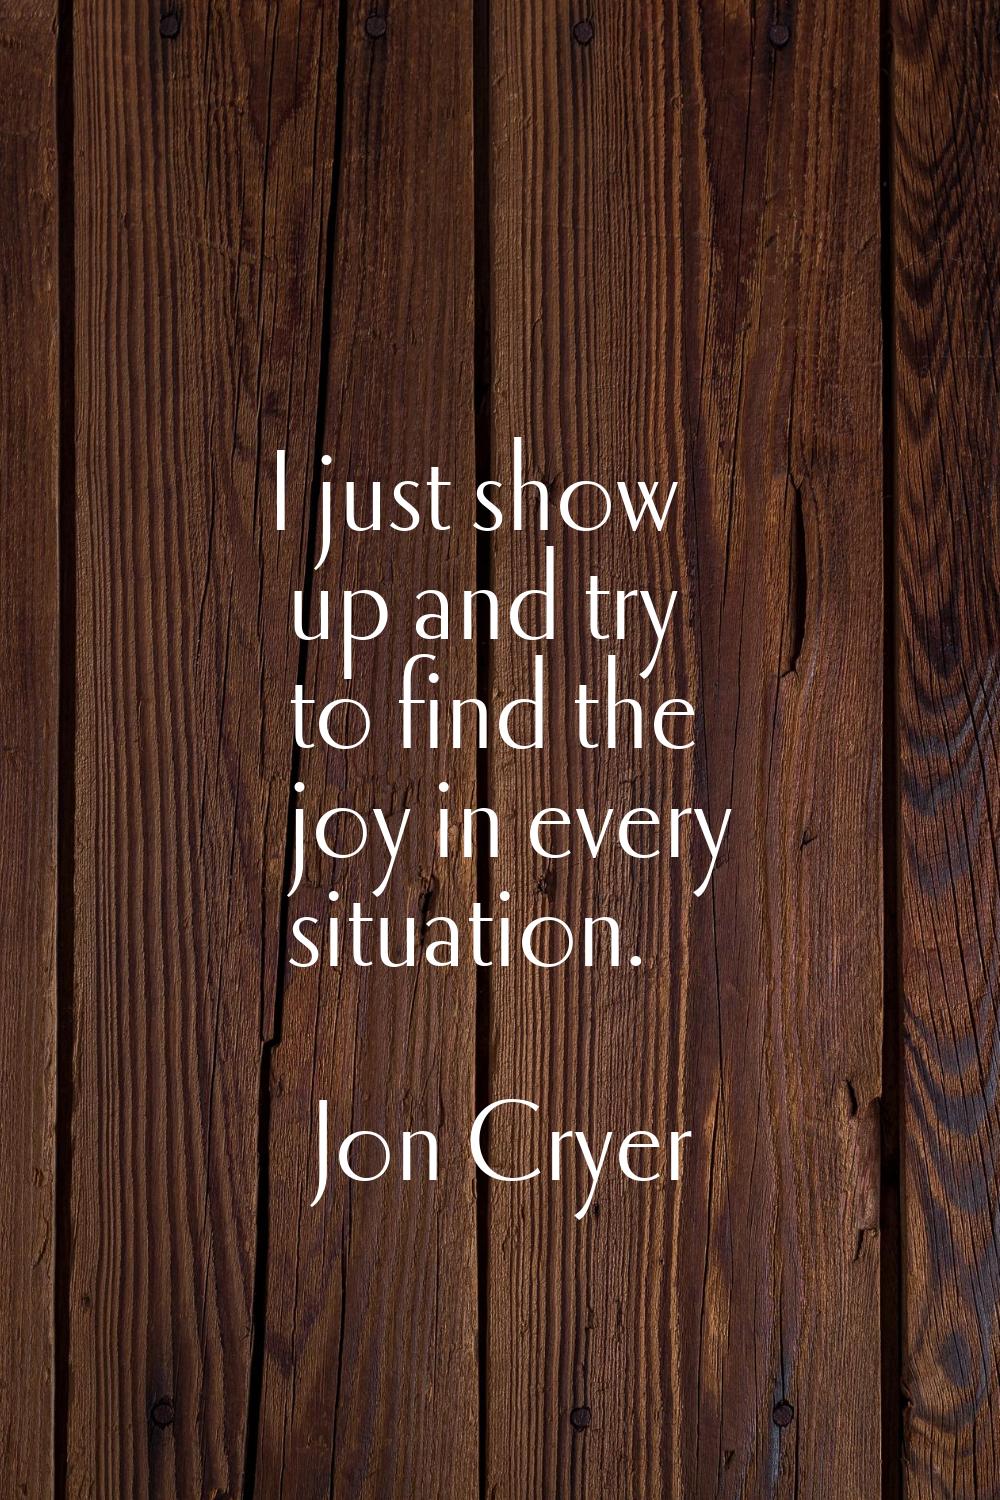 I just show up and try to find the joy in every situation.